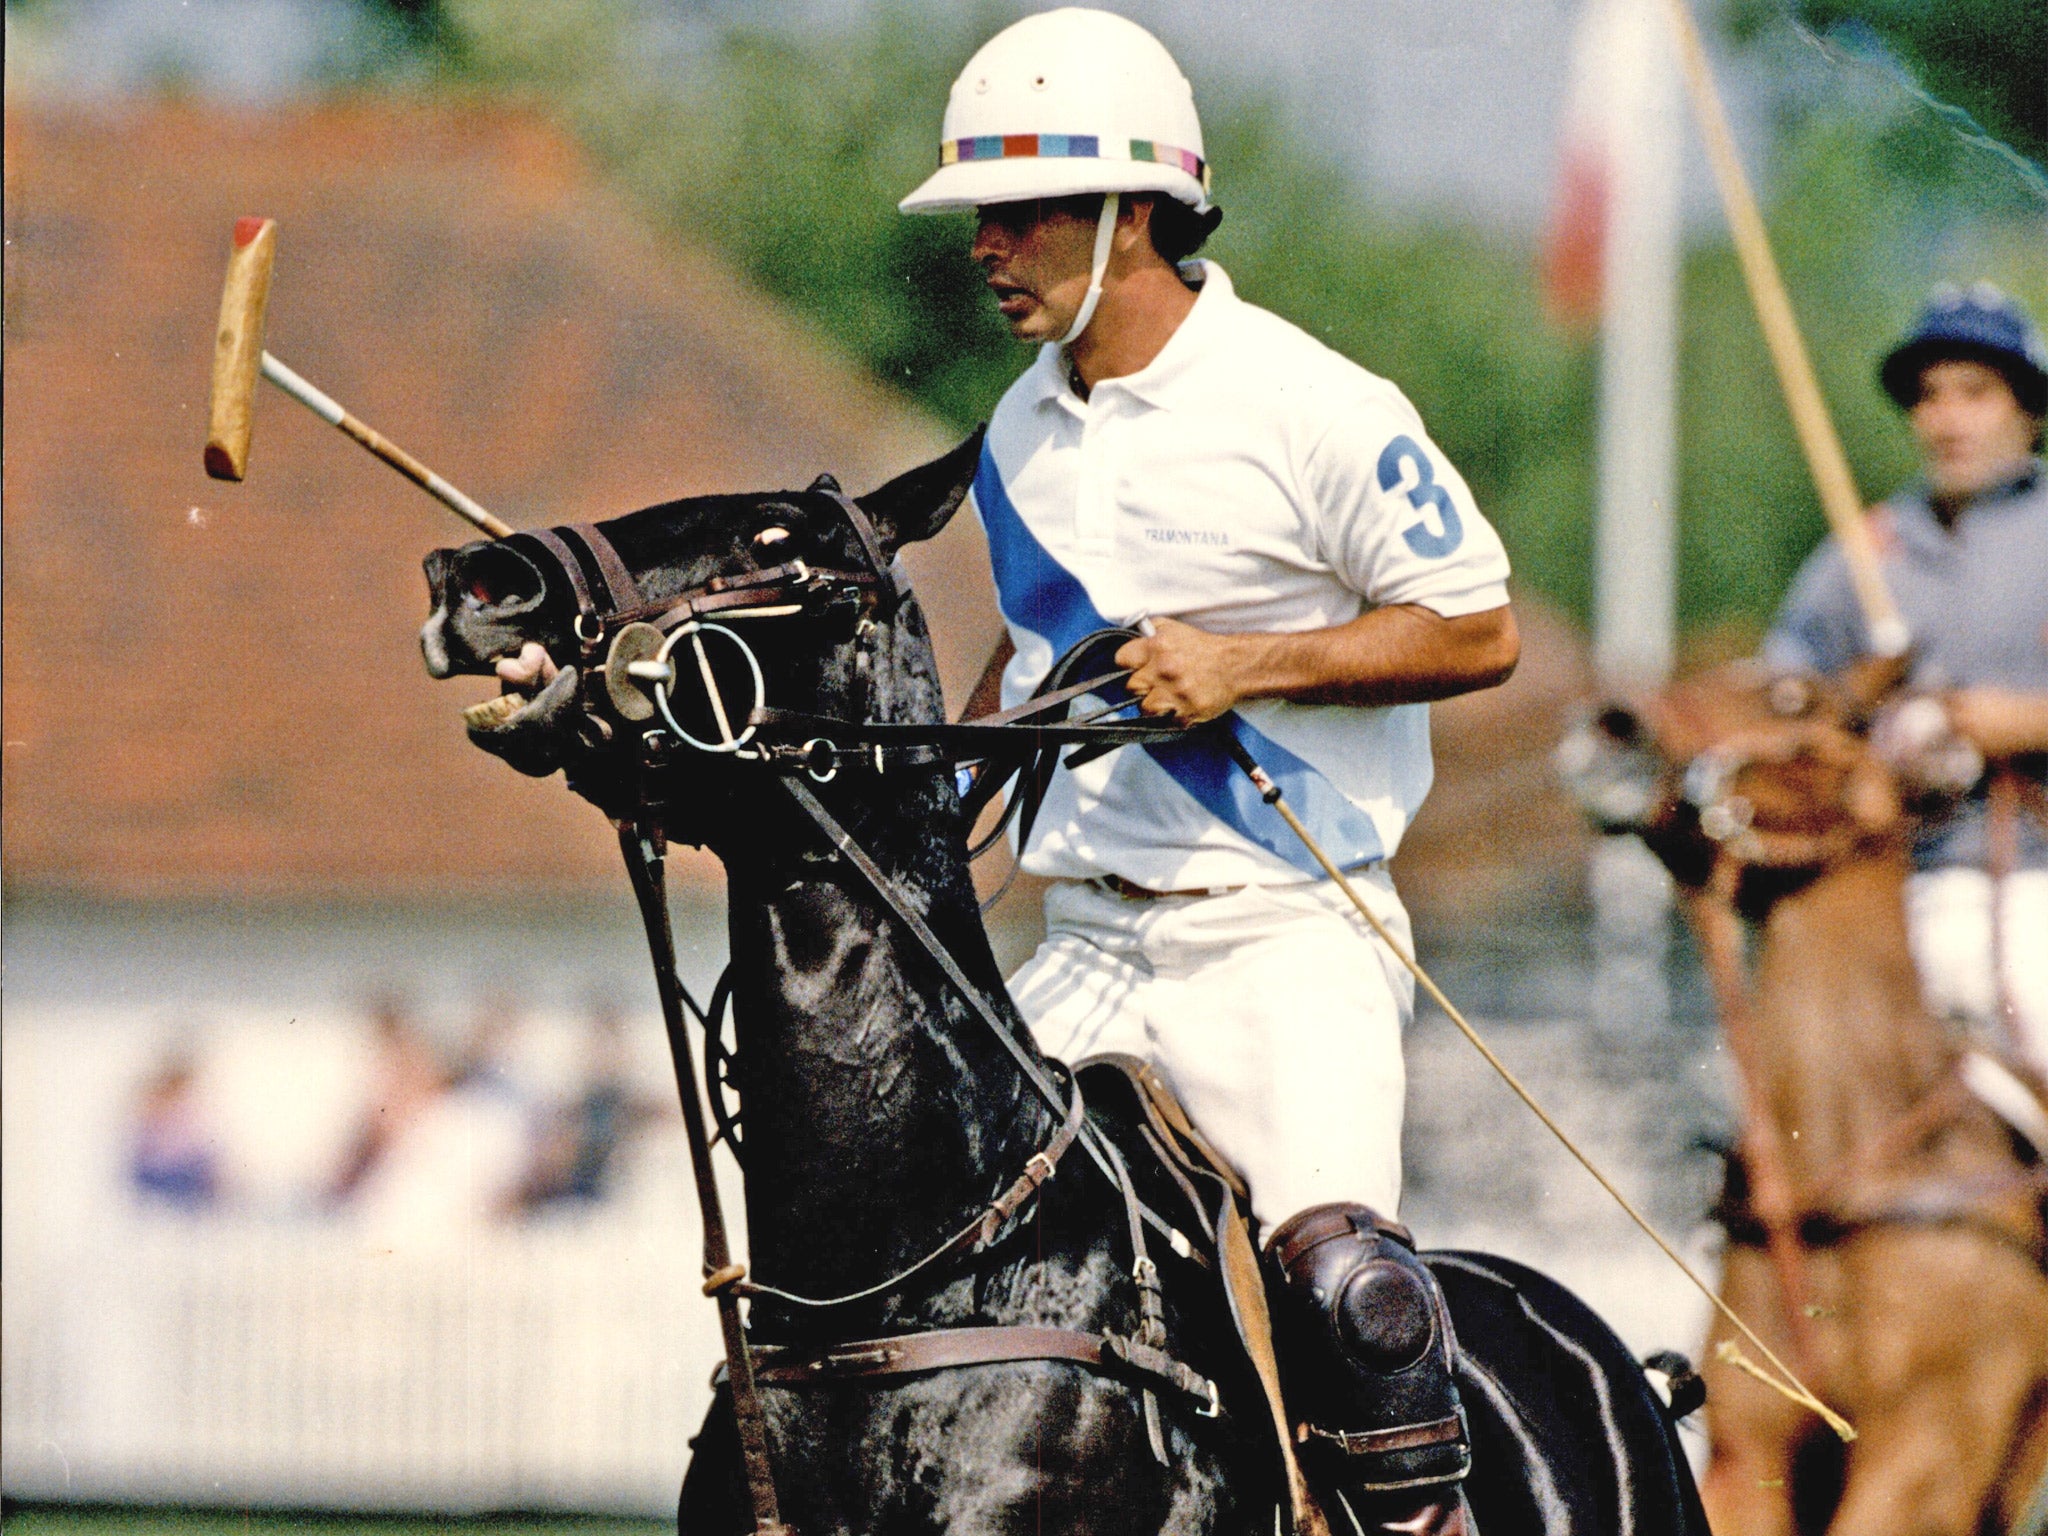 Gracida in action at the Royal Berkshire Club in 1992